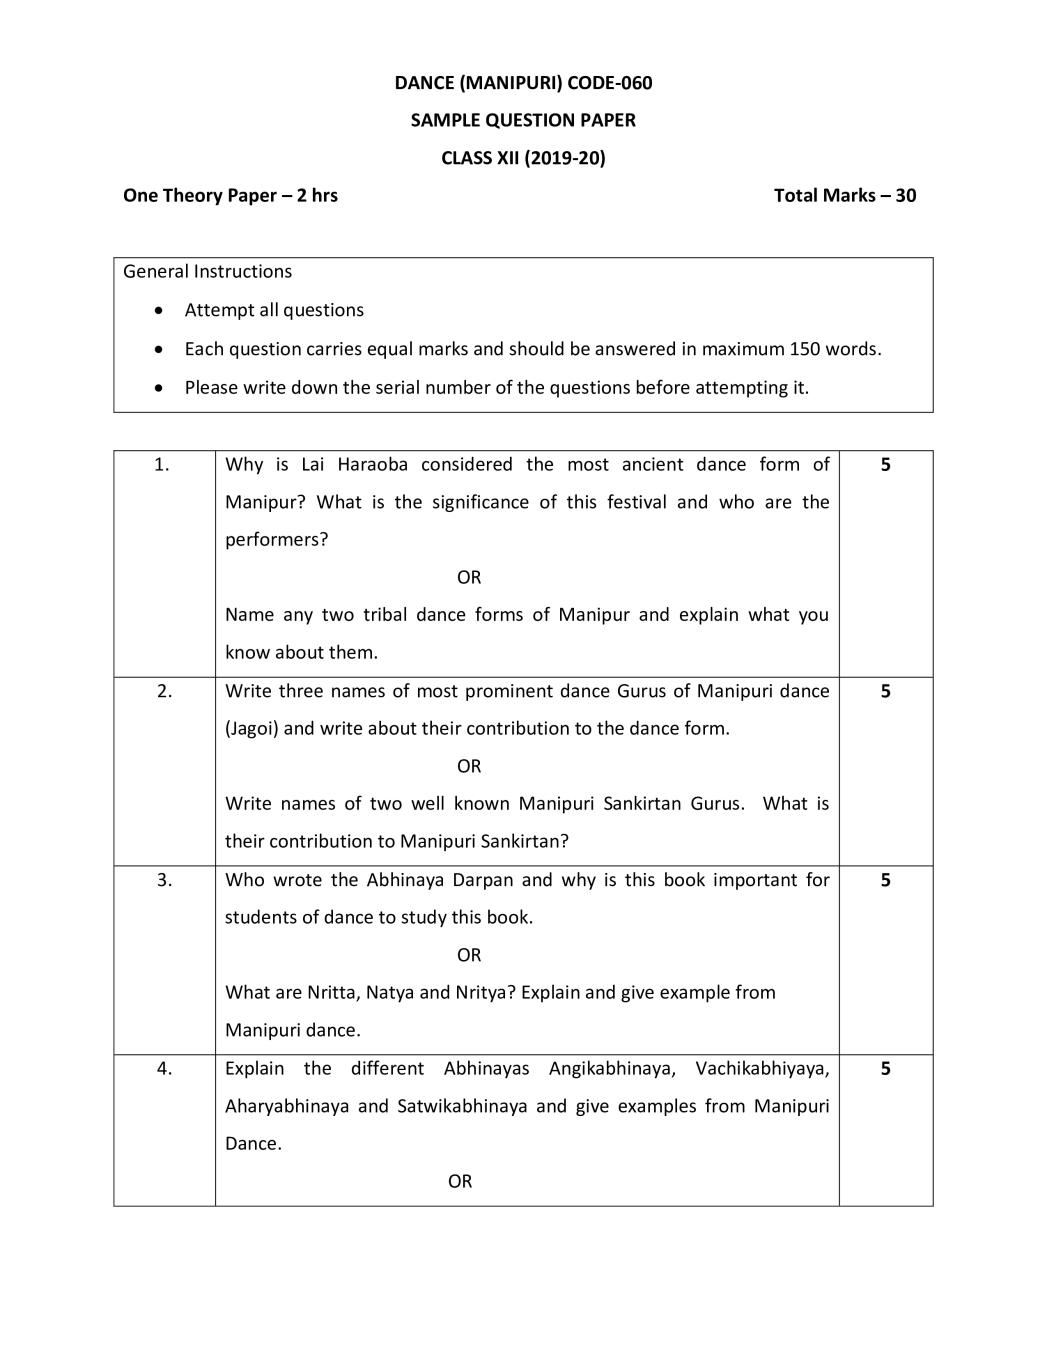 CBSE Class 12 Sample Paper 2020 for Dance Manipuri - Page 1